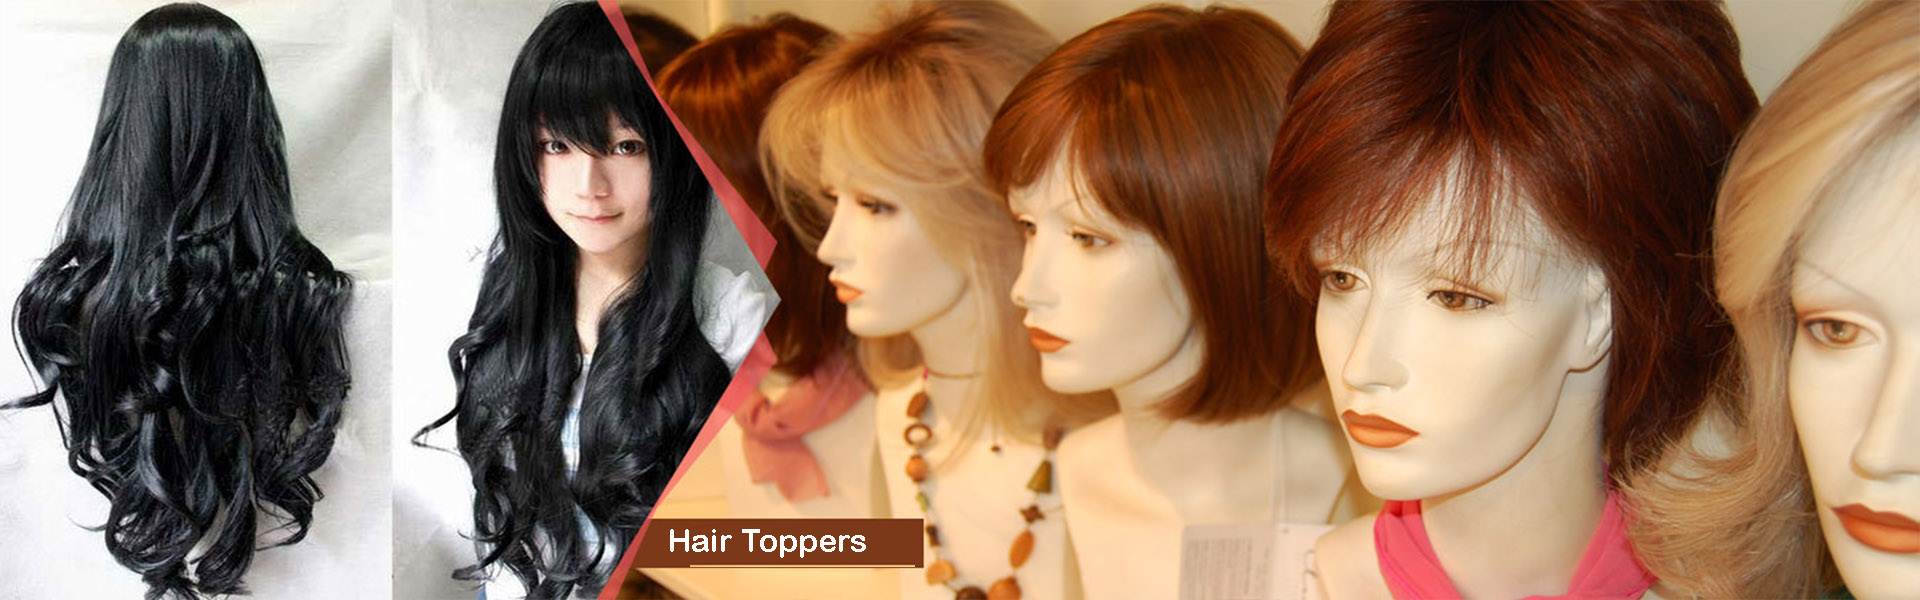 hair toppers banner